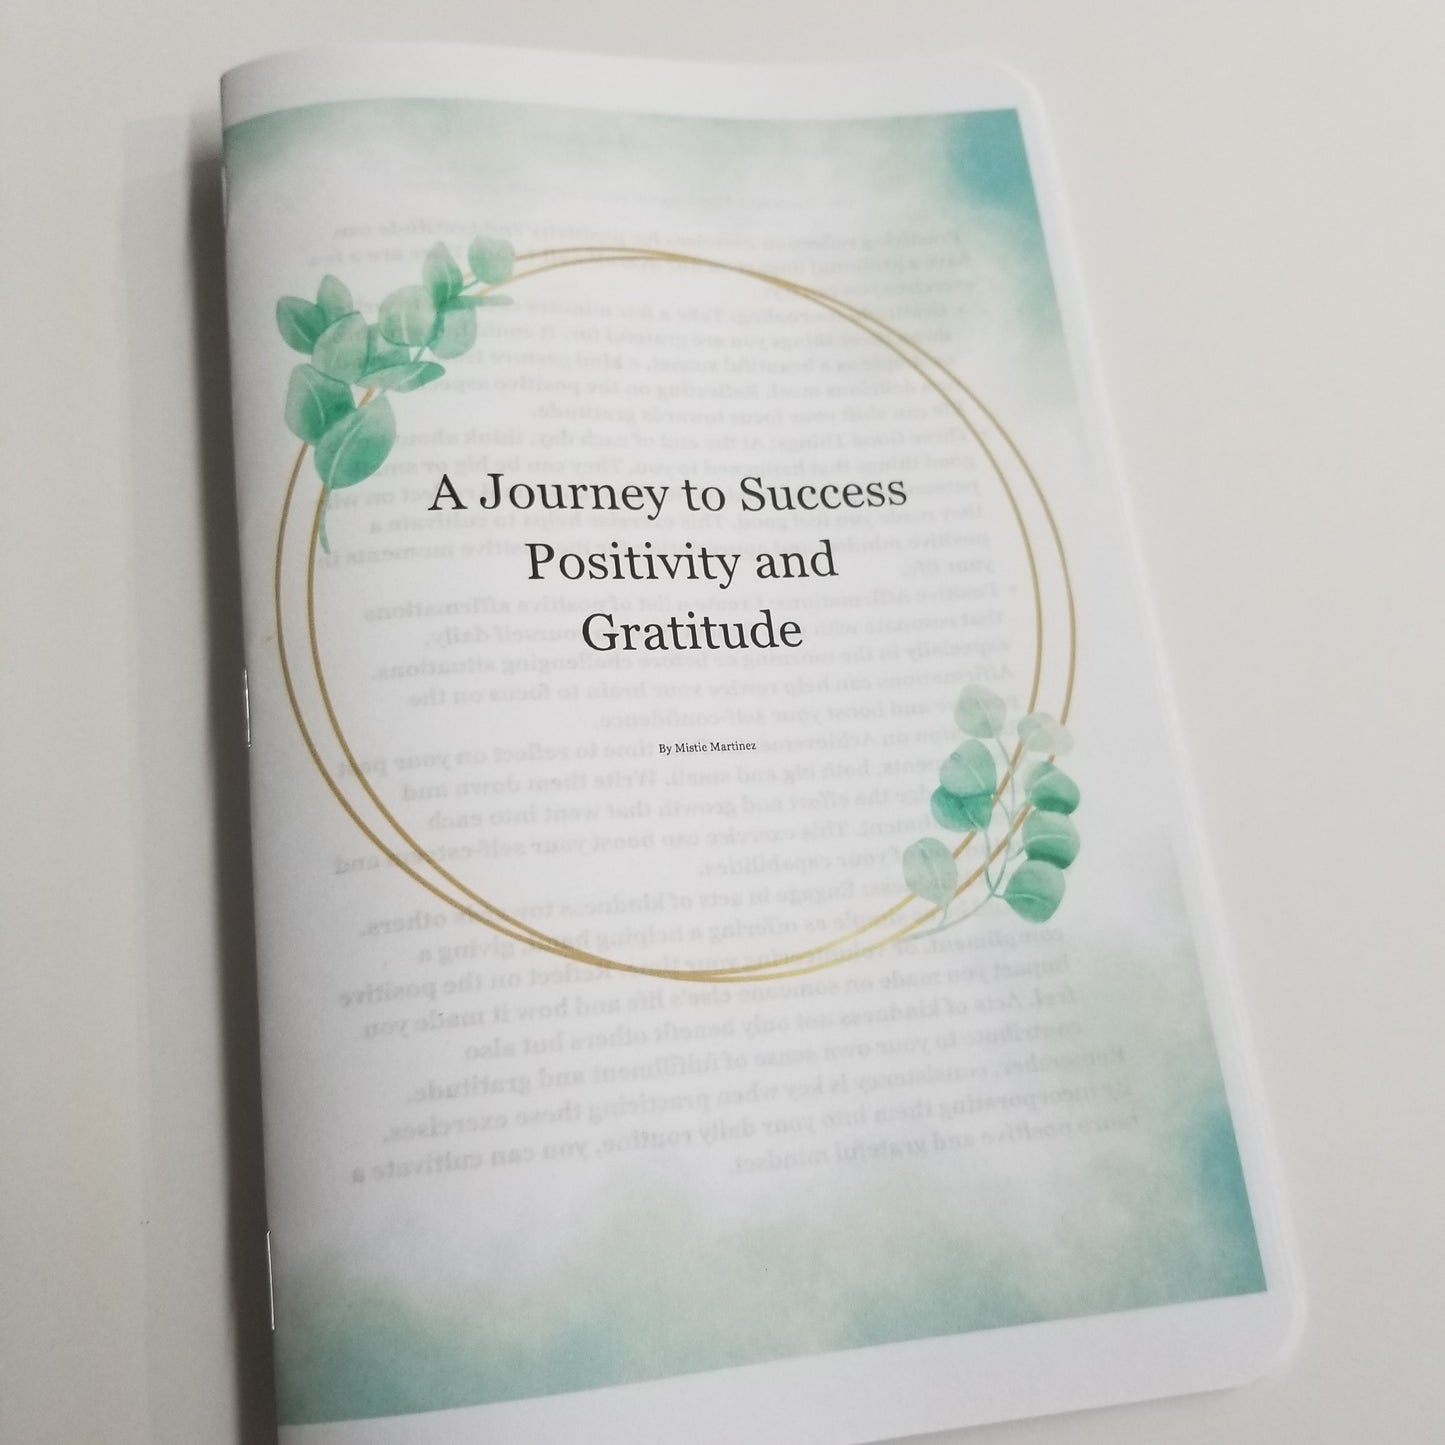 Positivity and Gratitude - A Journey to Success